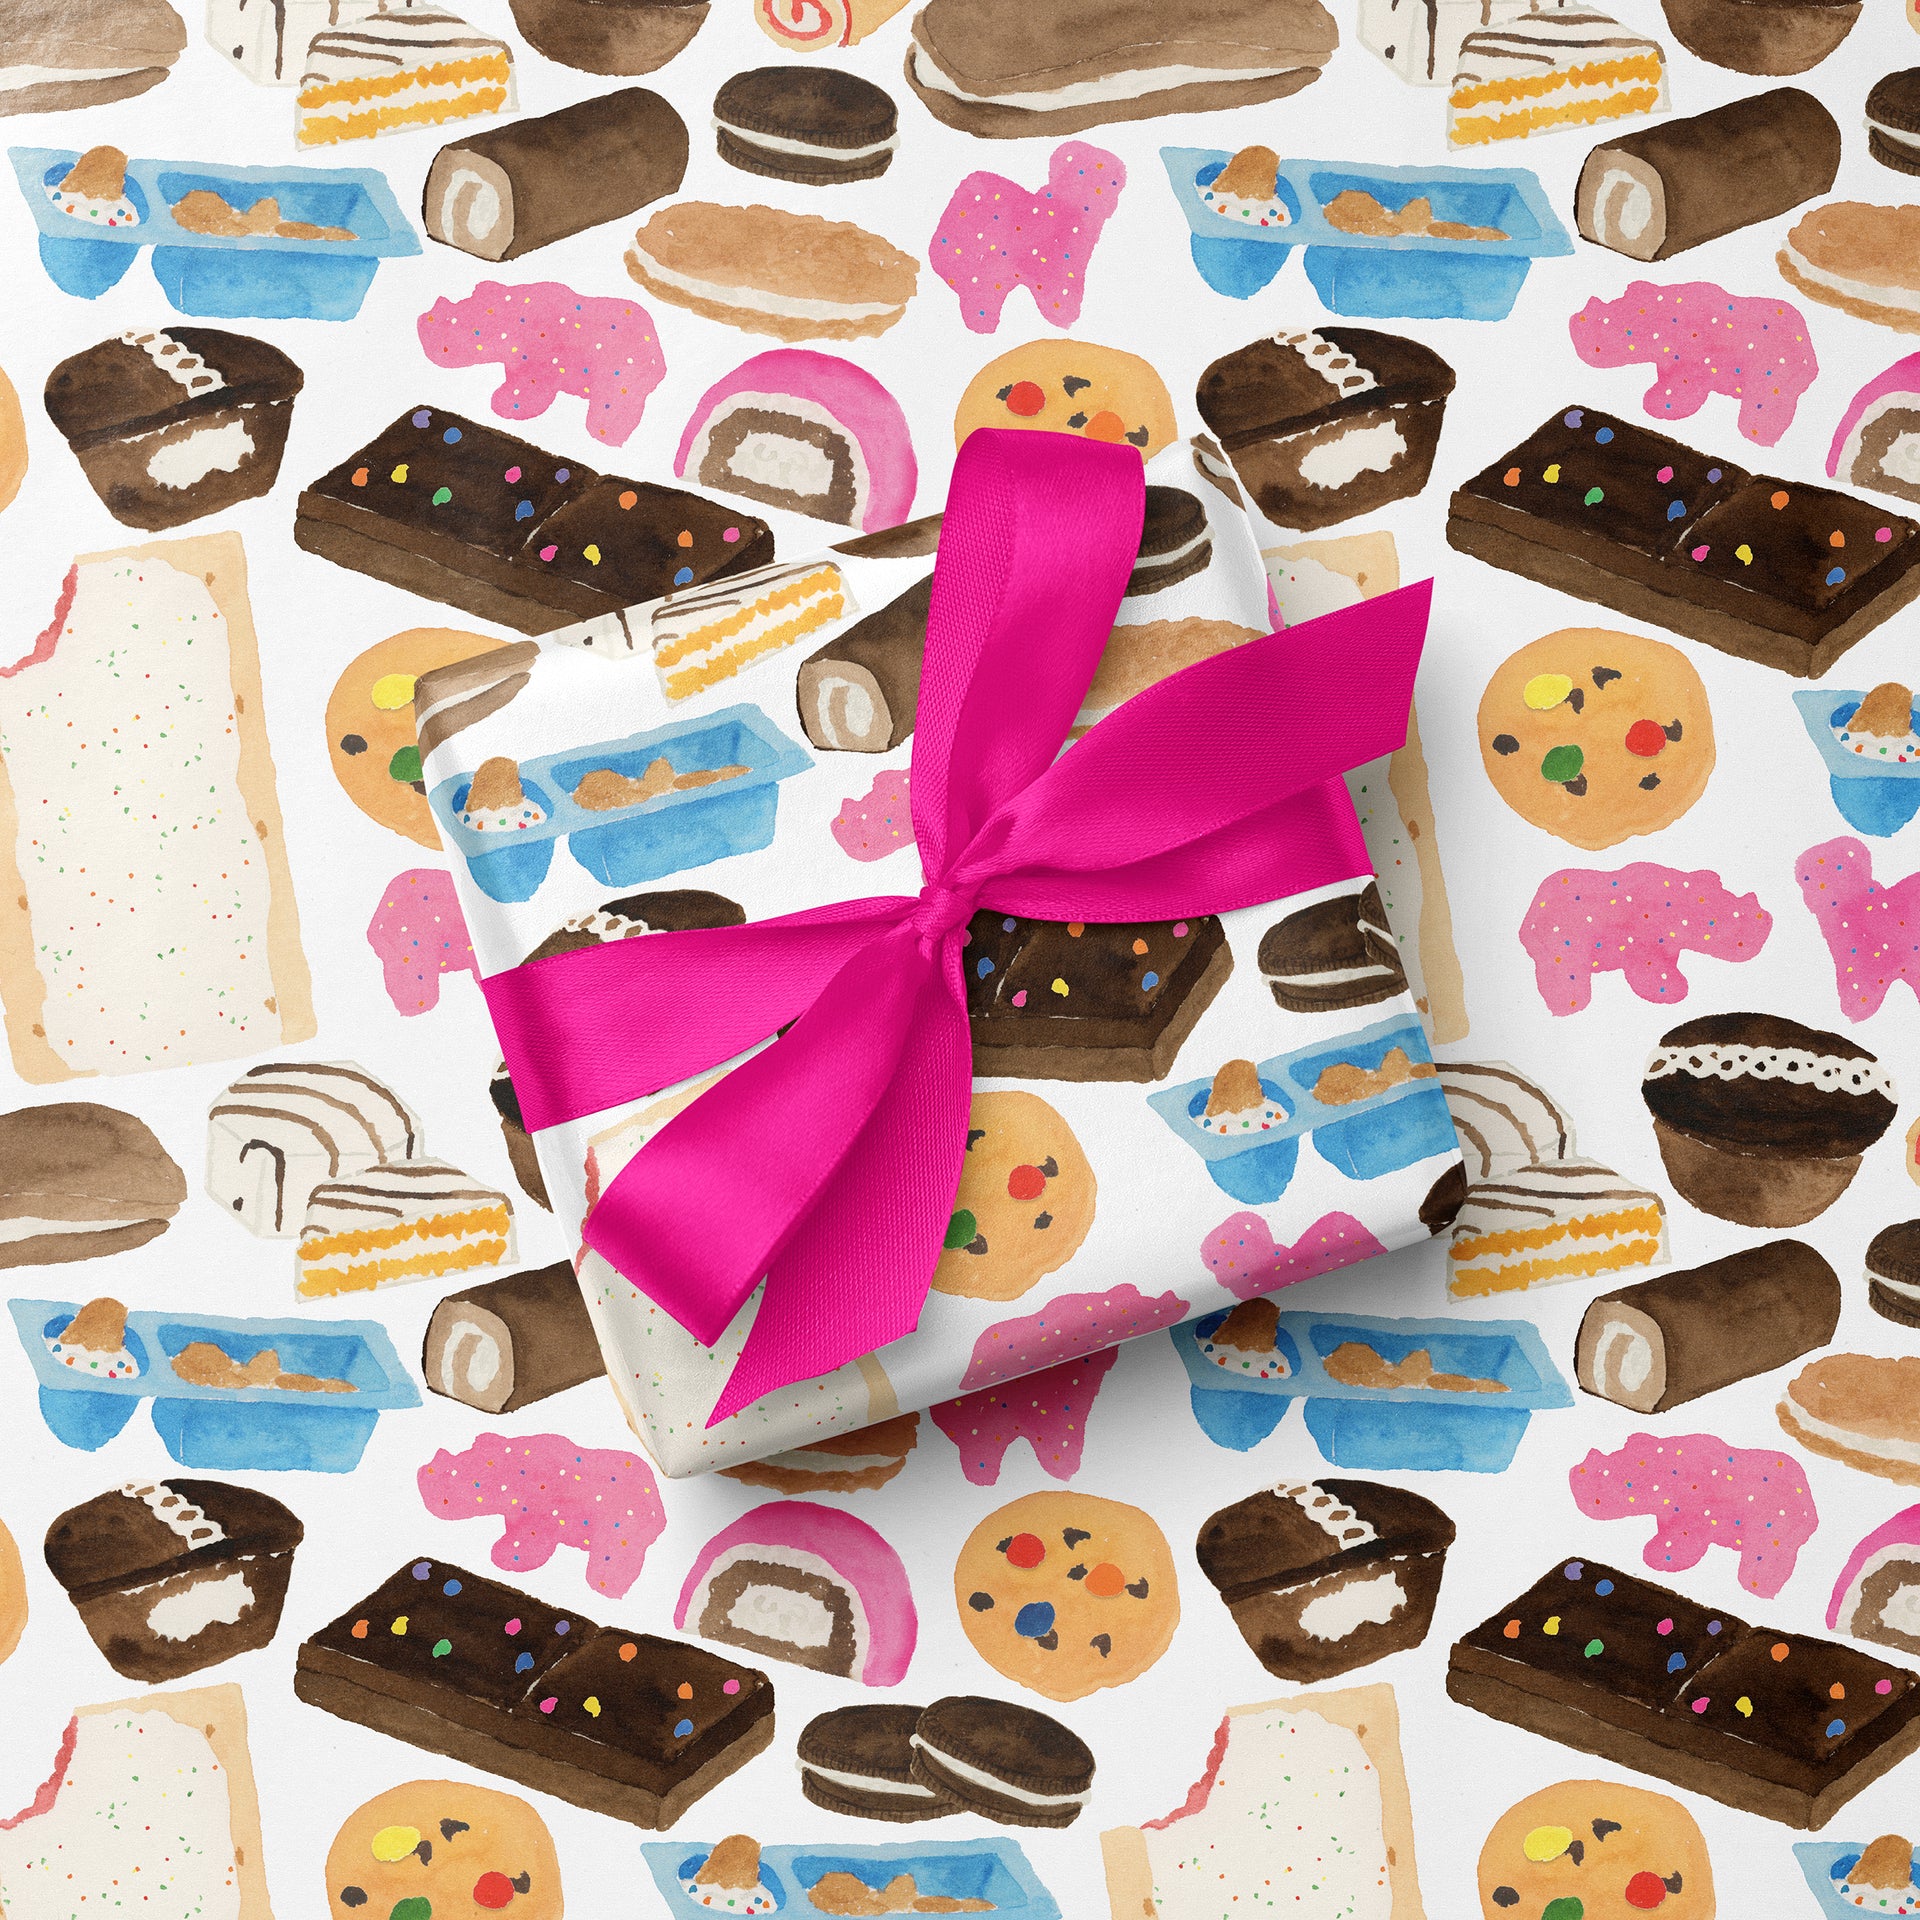 Nostalgic Junk Food Gift Wrap by Gert & Co